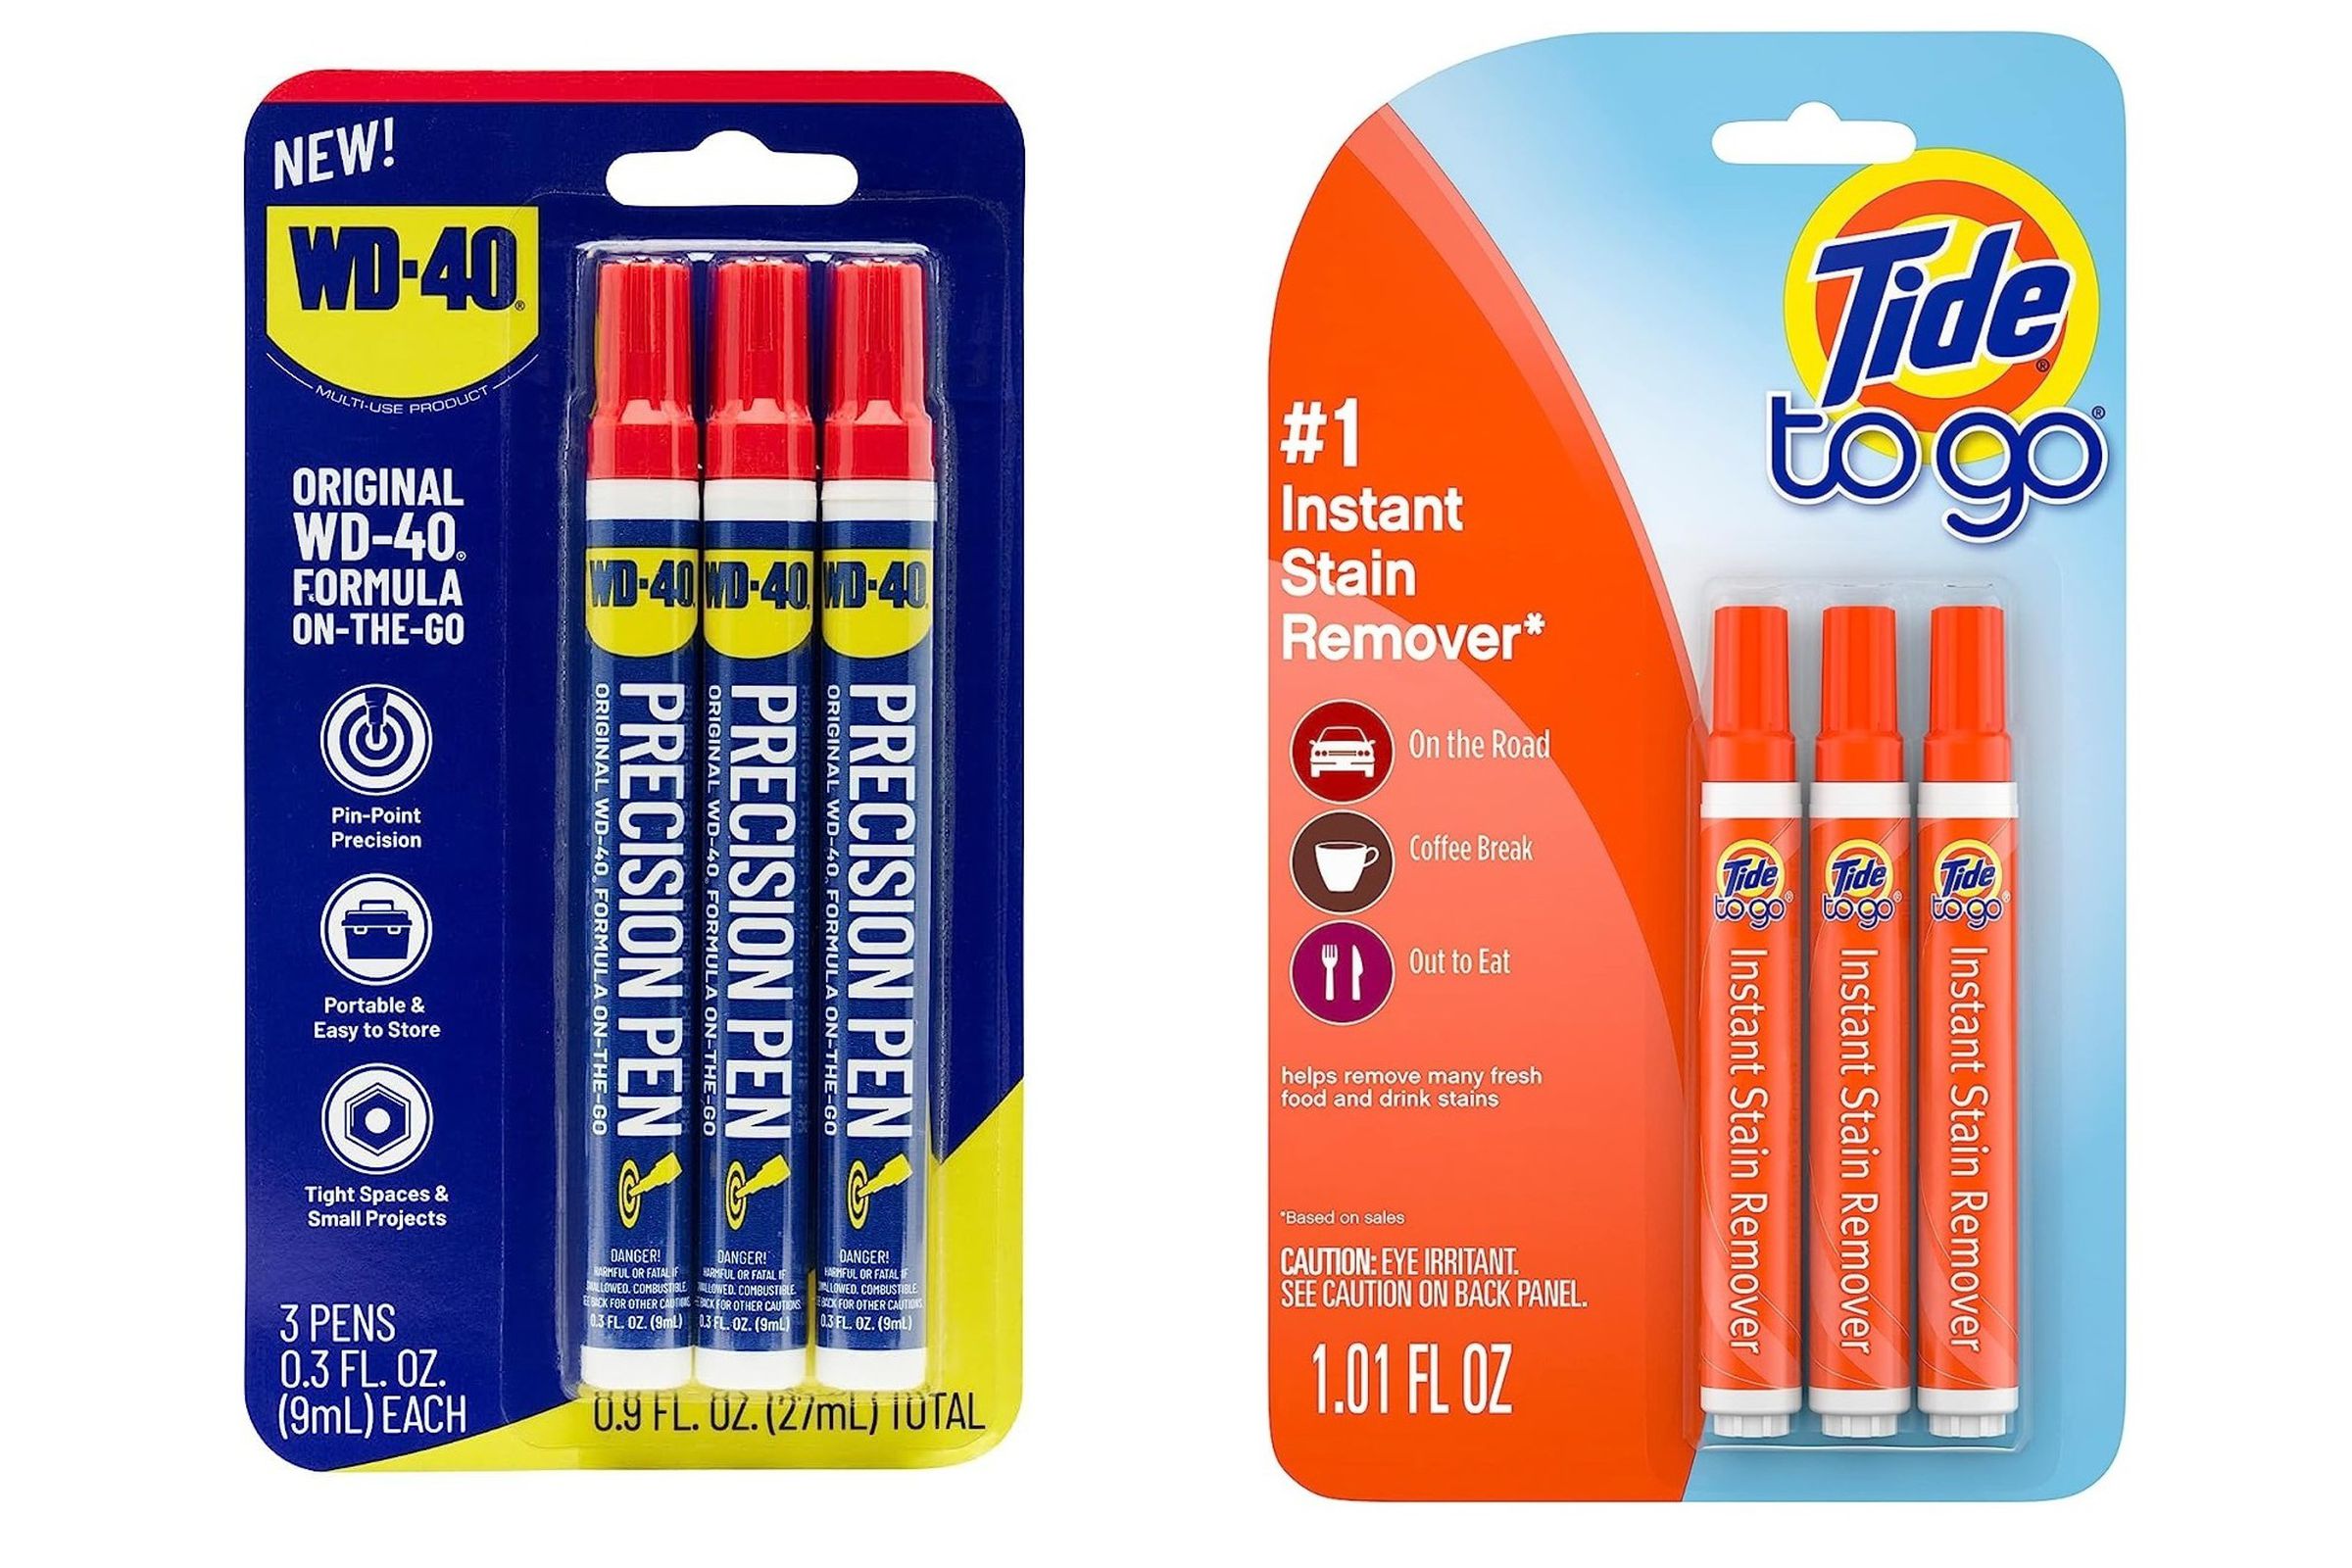 comparing the packages of Tide To Go and the new WD-40 Precision Pen, which look like the same idea